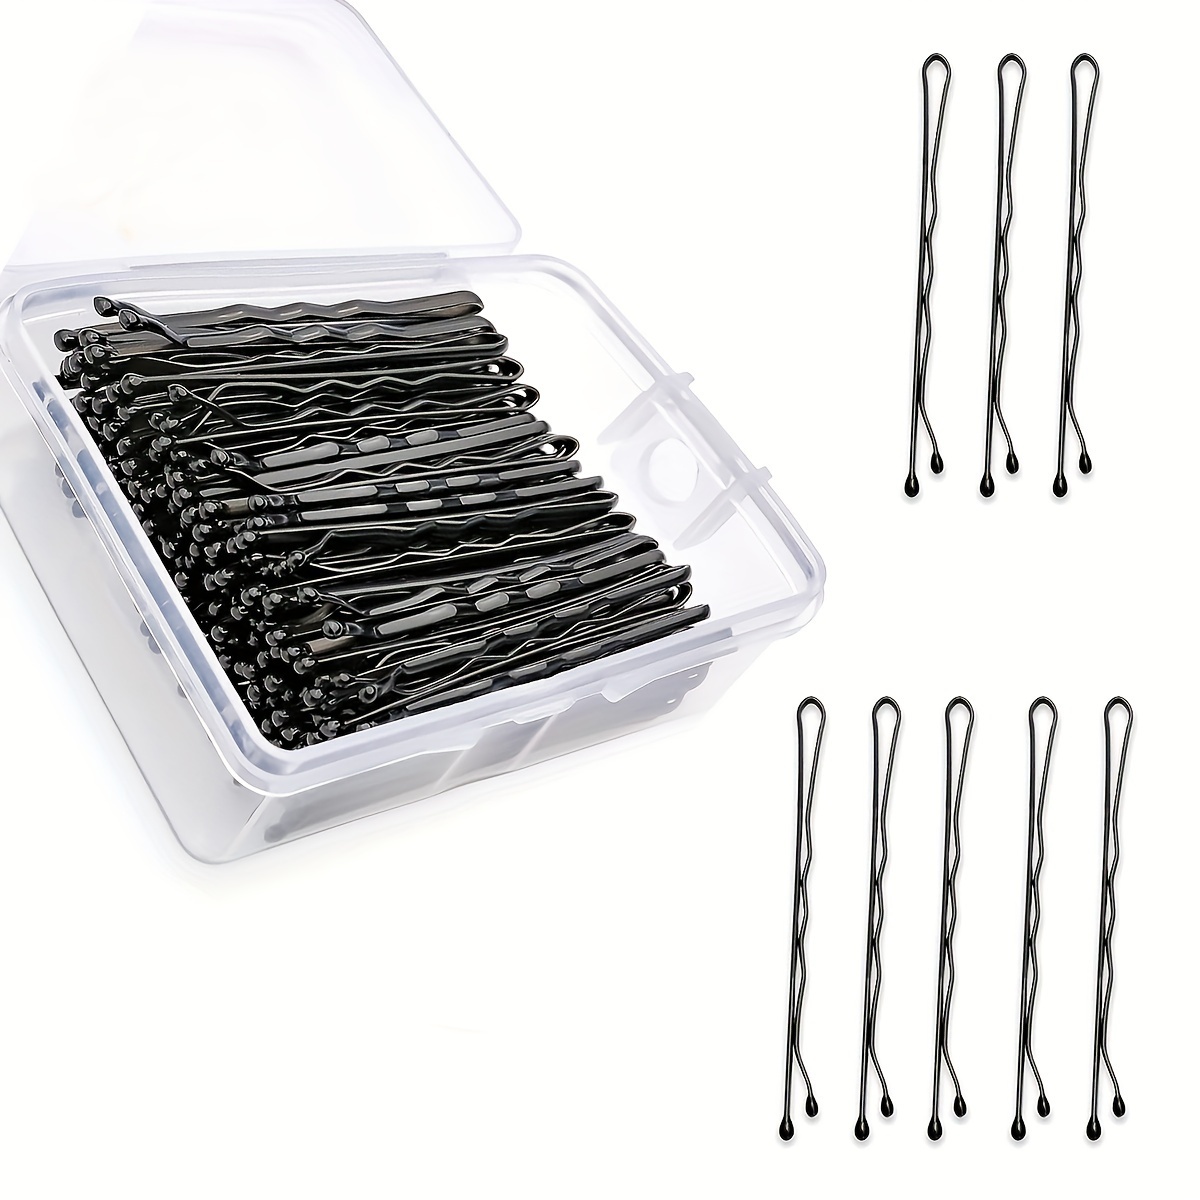 

100pcs/box Hair Pins Kit Secure Hold Bobby Pins Clips For Women Girls 2 Inch Hairpins Hairdressing Tools With Transparent Storage Box